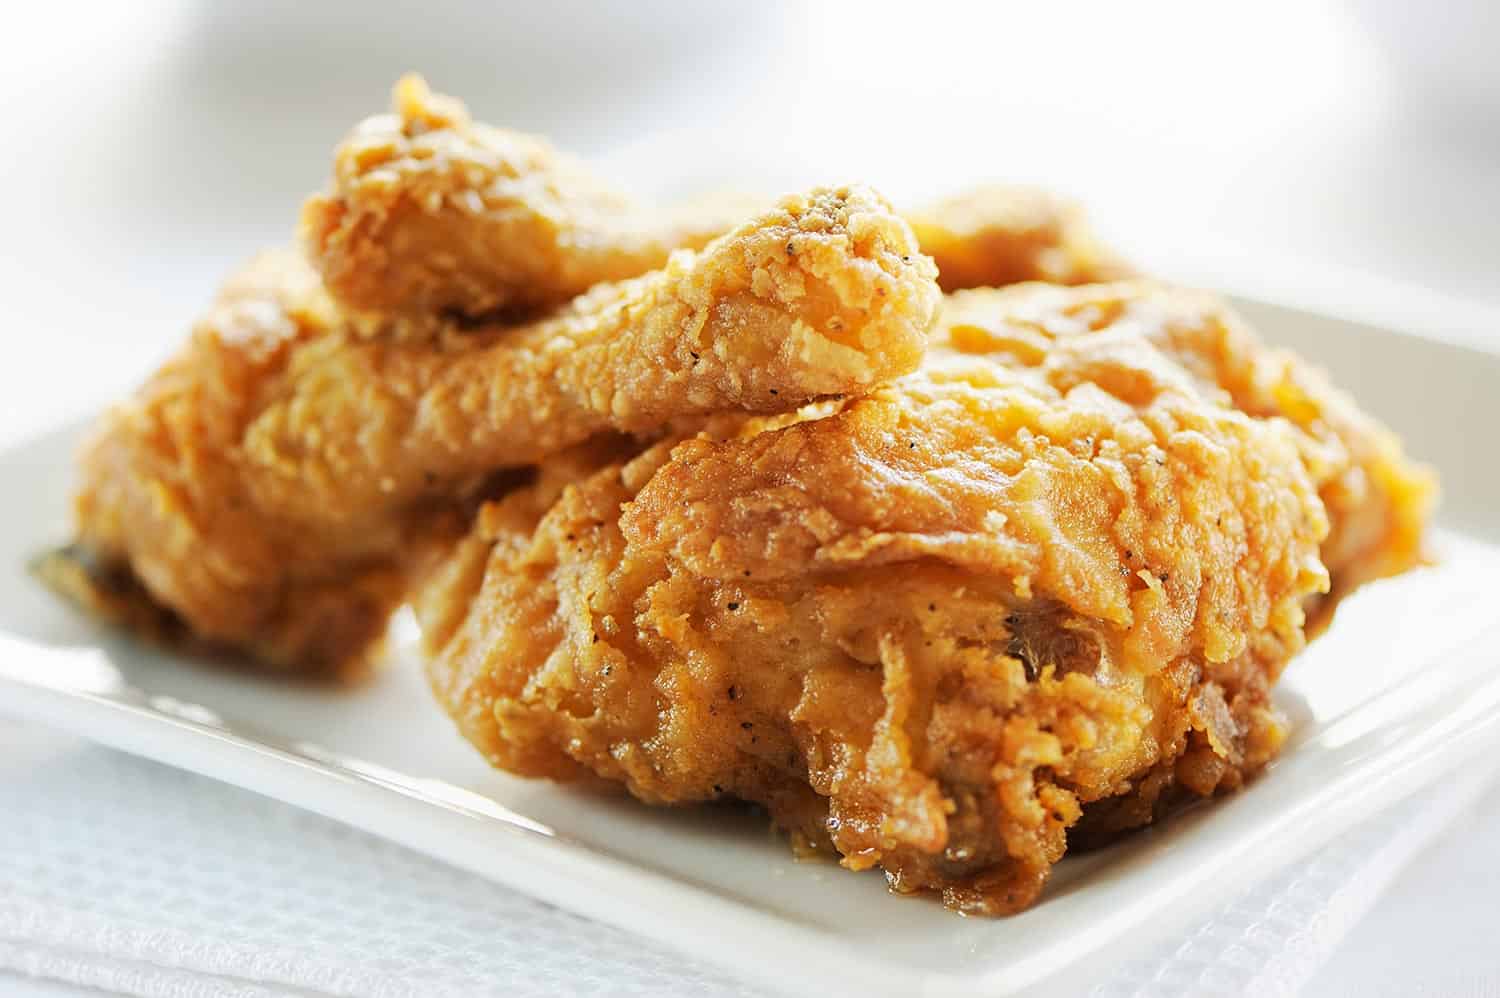 Crispy fried breast and legs of chicken